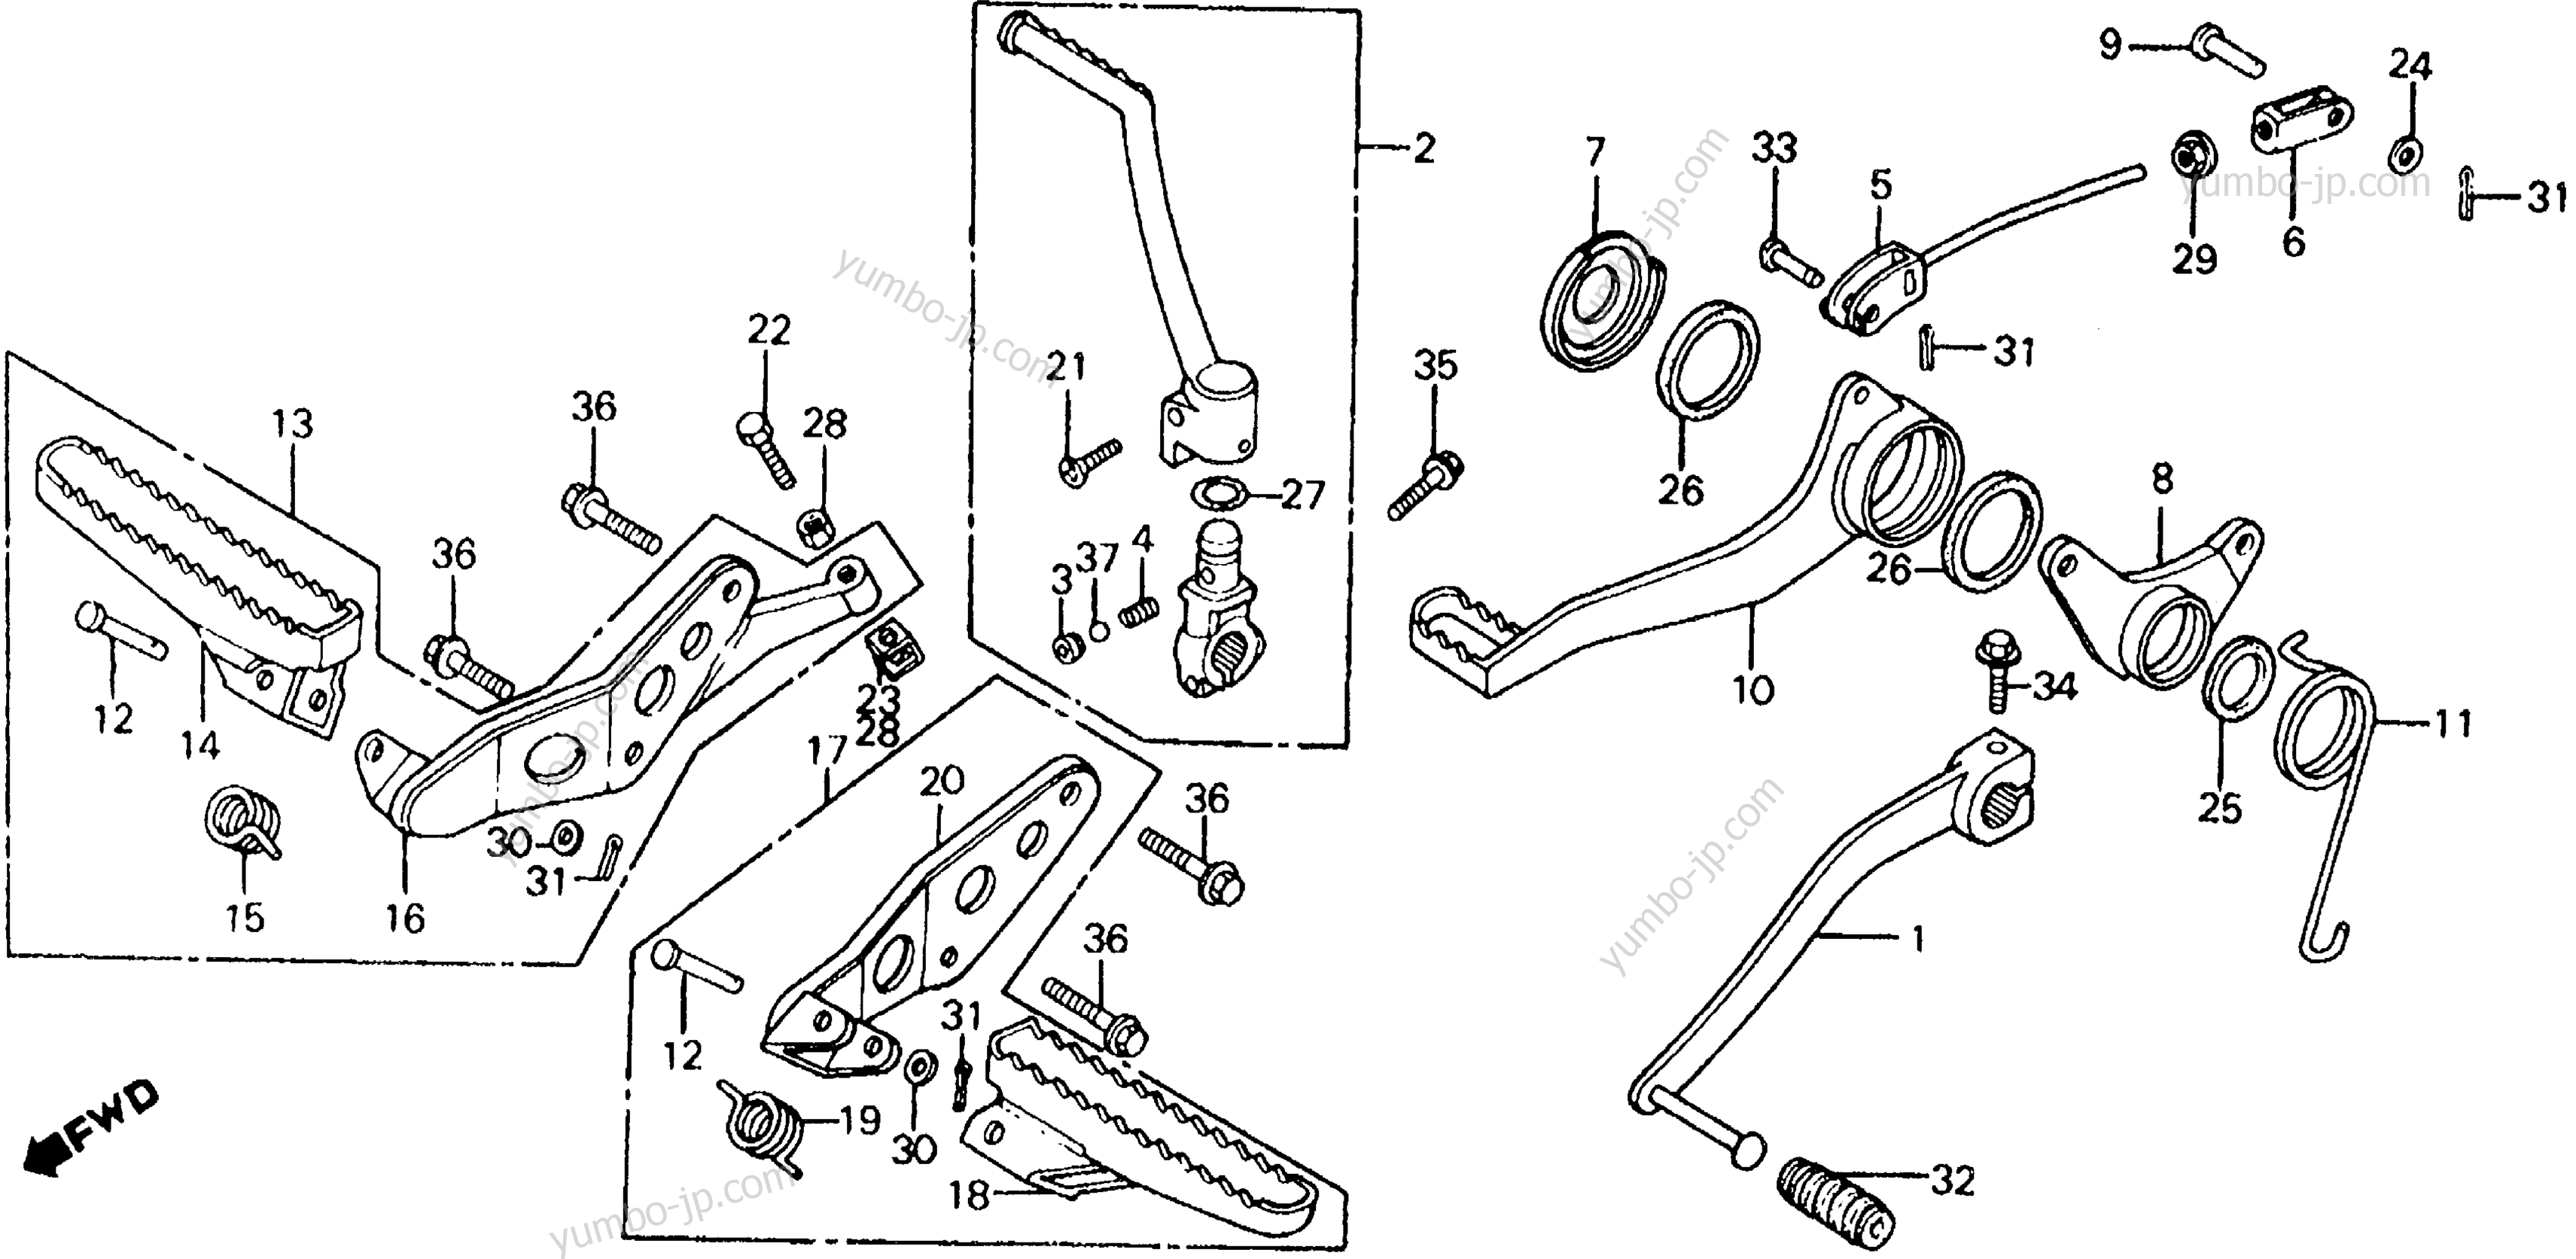 FOOTPEGS / BRAKE PEDAL / GEARSHIFT PEDAL for ATVs HONDA ATC200X A 1983 year